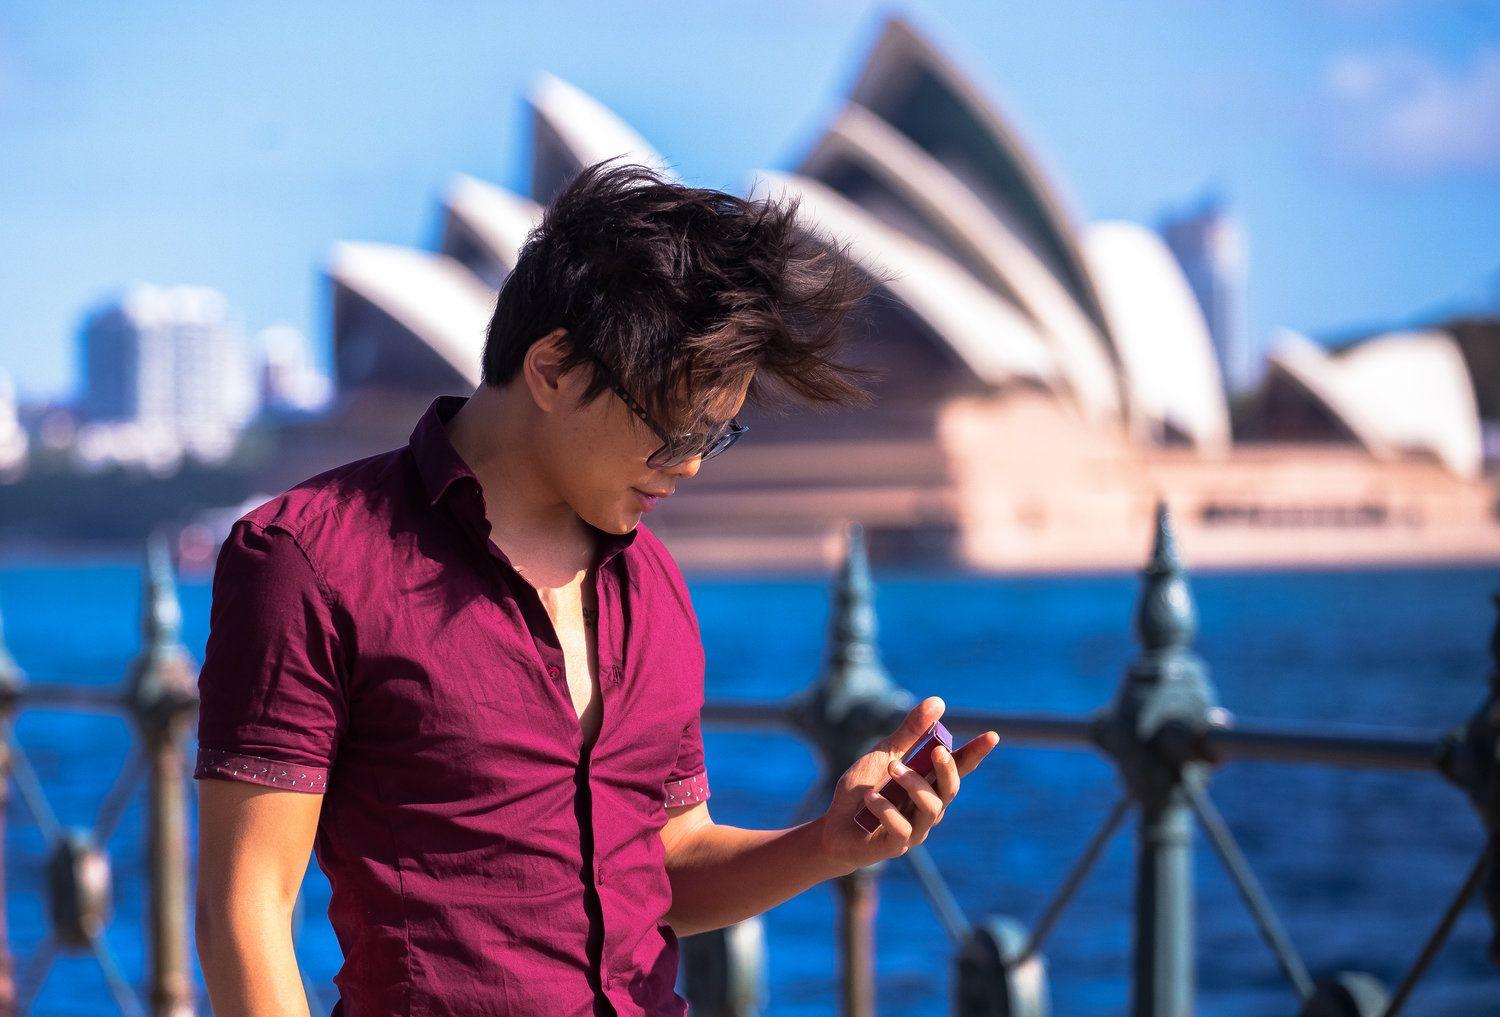 Shin Lim Magic. Welcome To The Art of Illusion